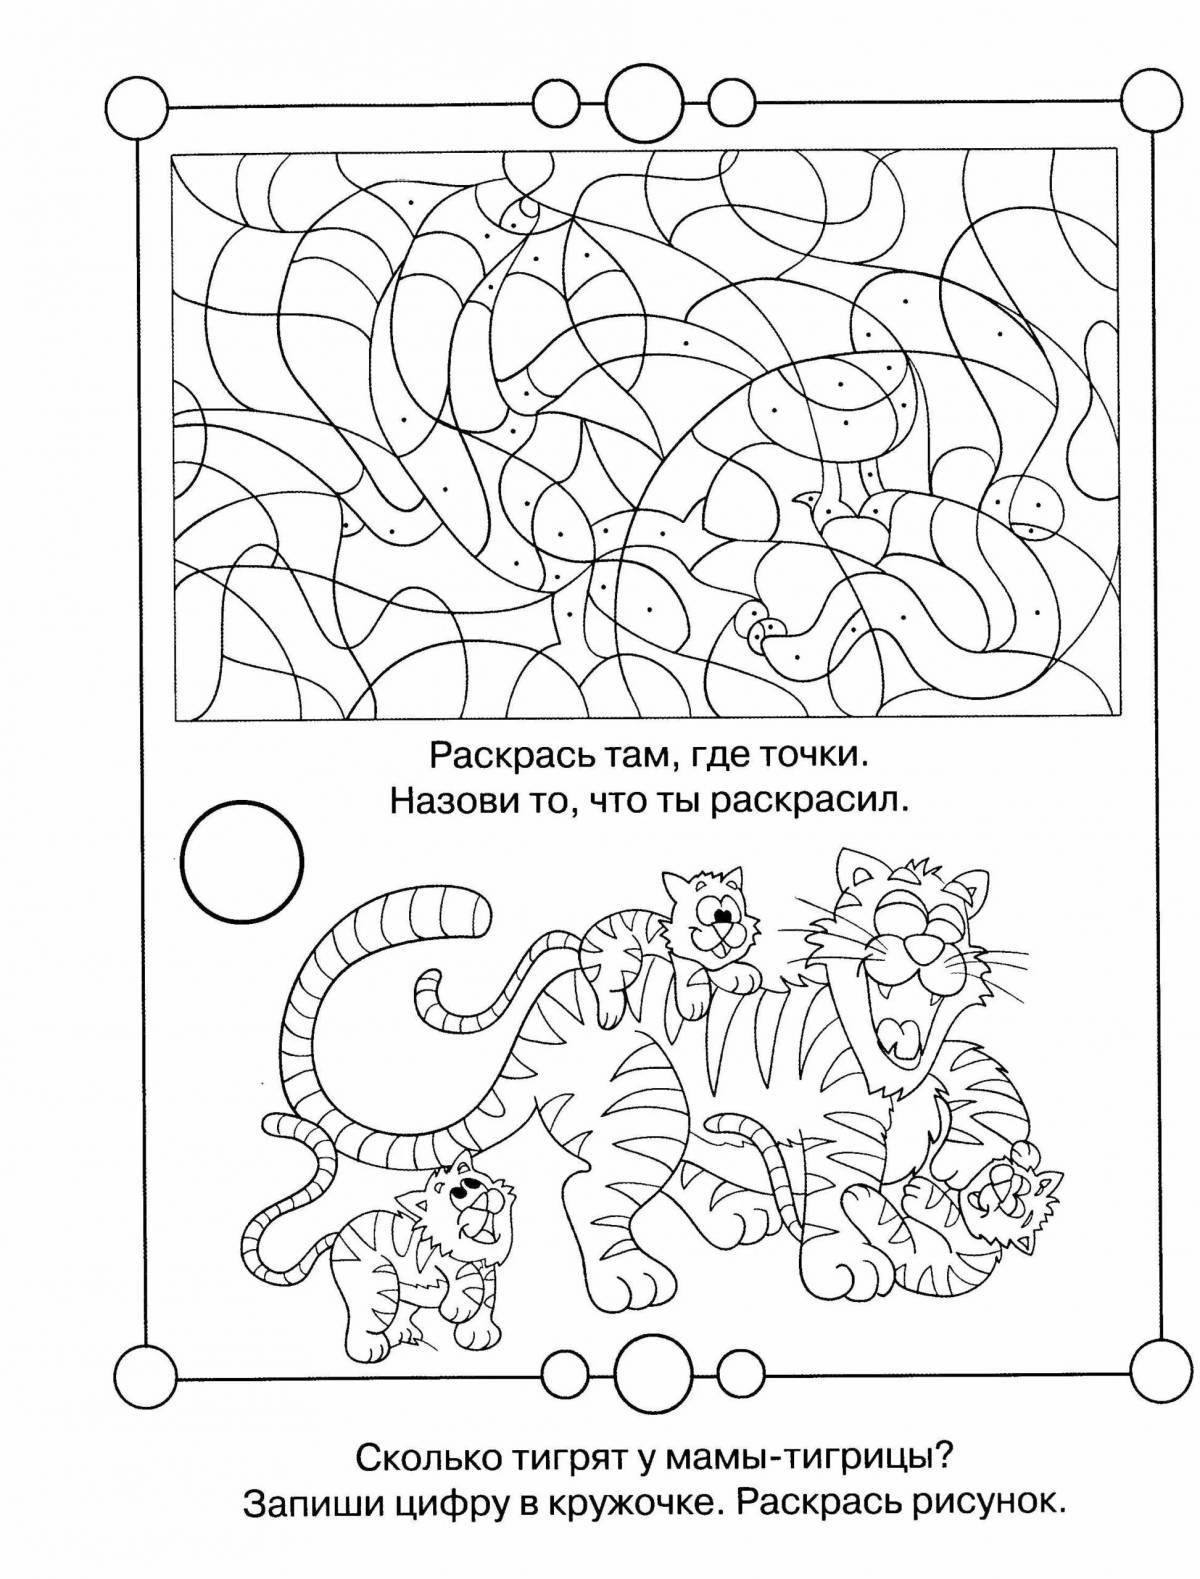 Innovative logical coloring book for kids